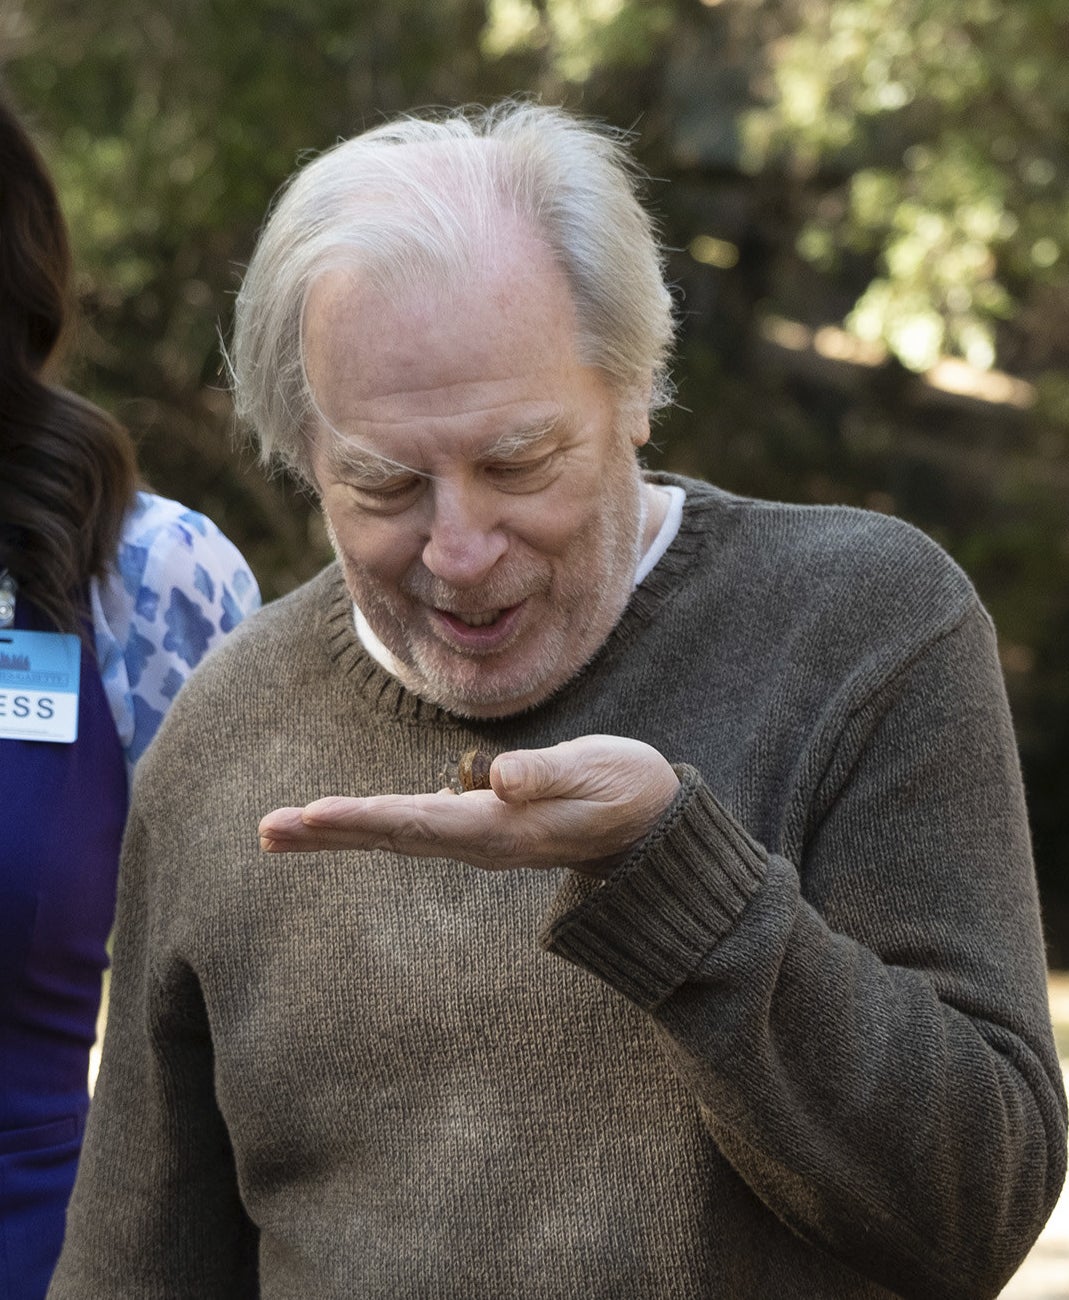 Michael McKean as Doug Forcett, talking to a snail he holds in his palm